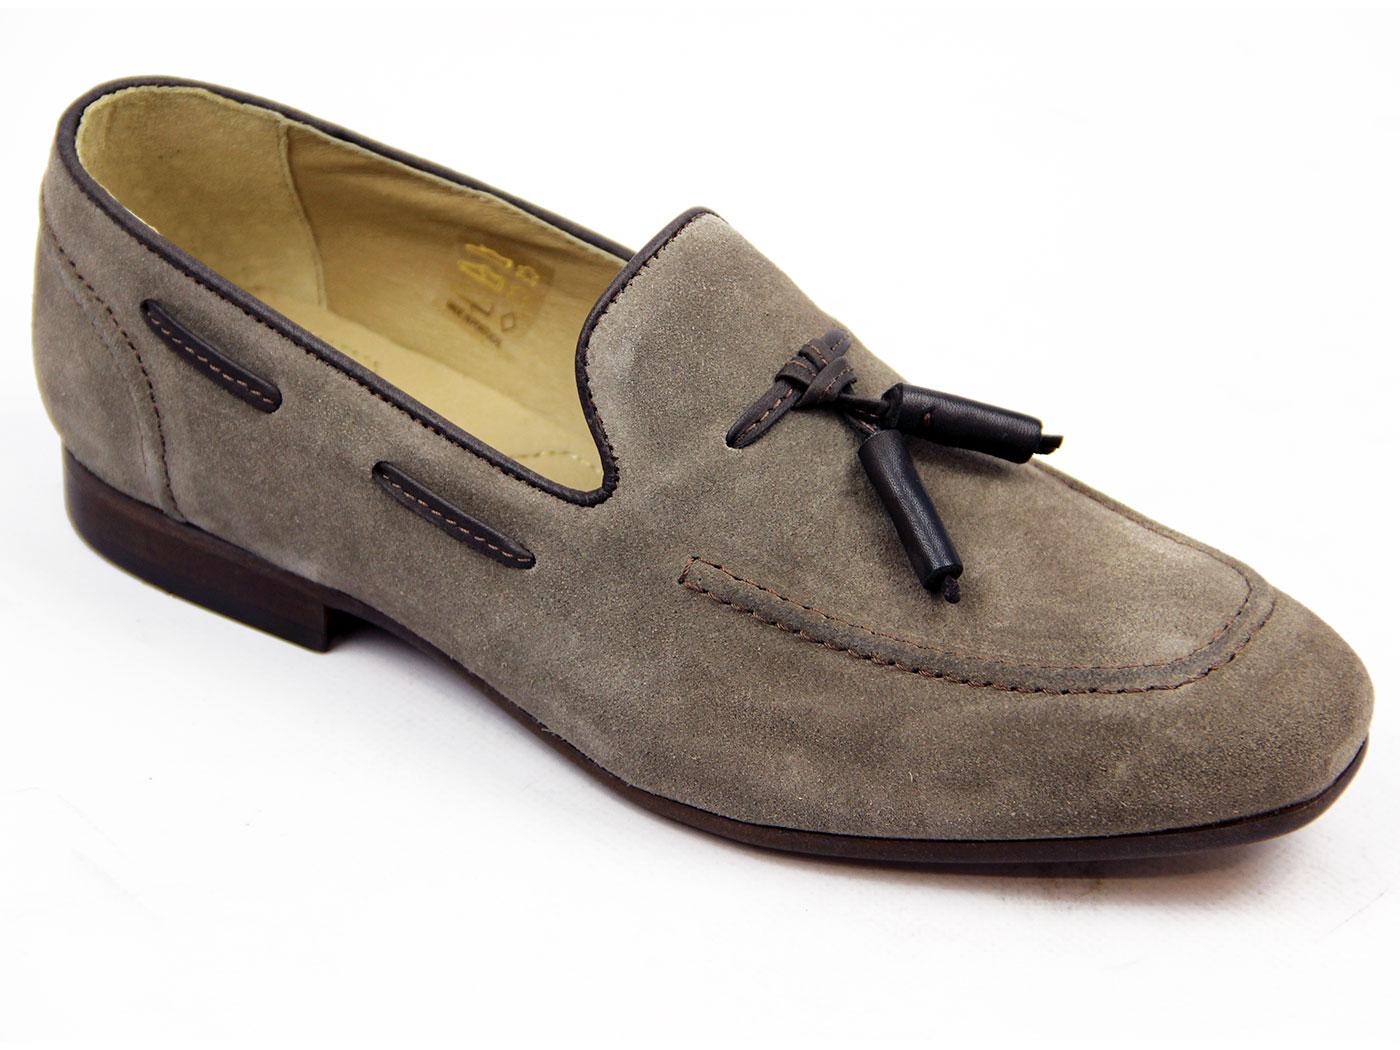 H by HUDSON Pierre Retro 60s Mod Taupe Suede Loafer Shoes